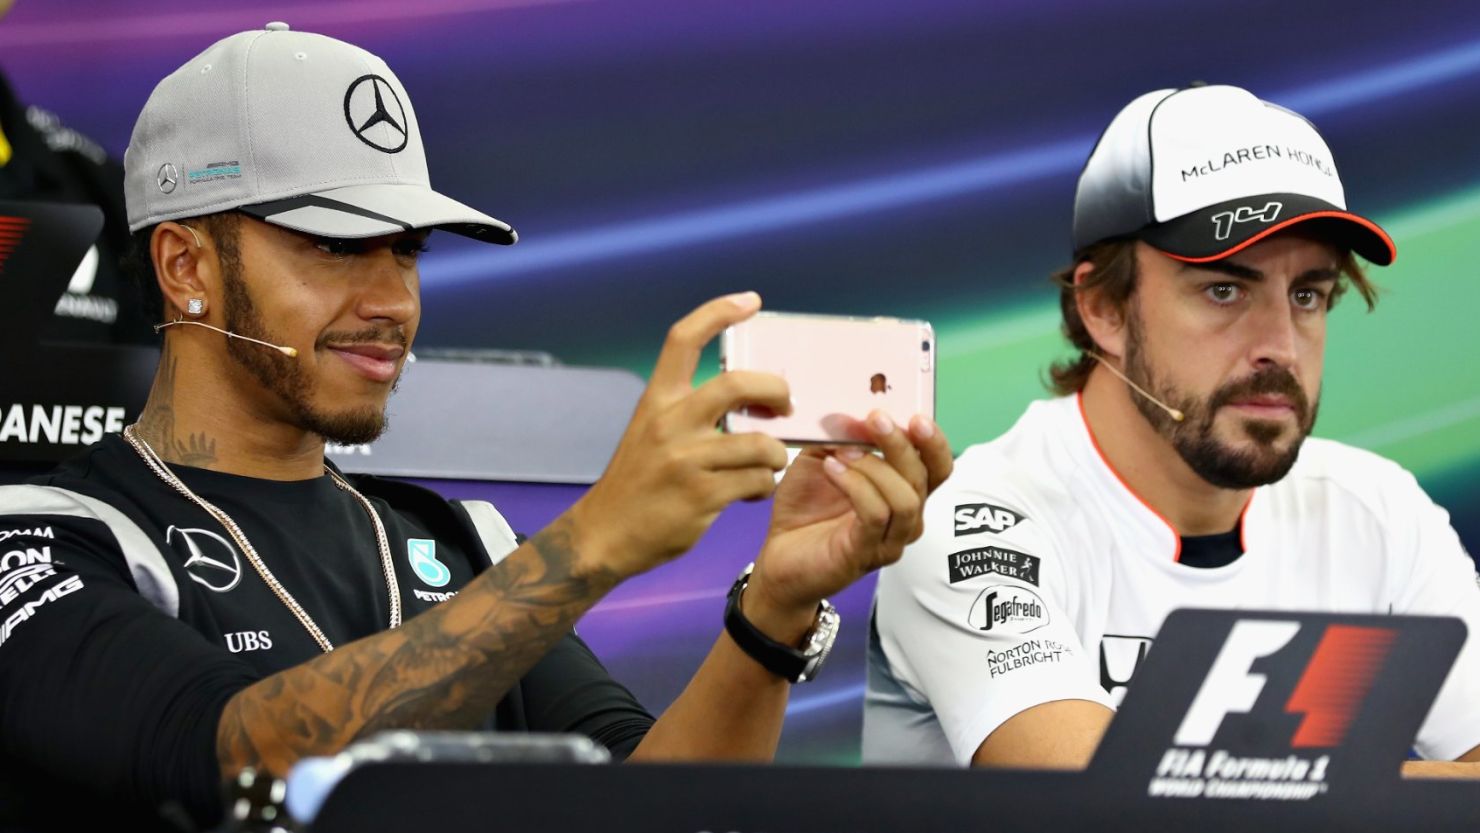 Lewis Hamilton plays with his phone in a press conference ahead of the Japan Grand Prix in Suzuka.